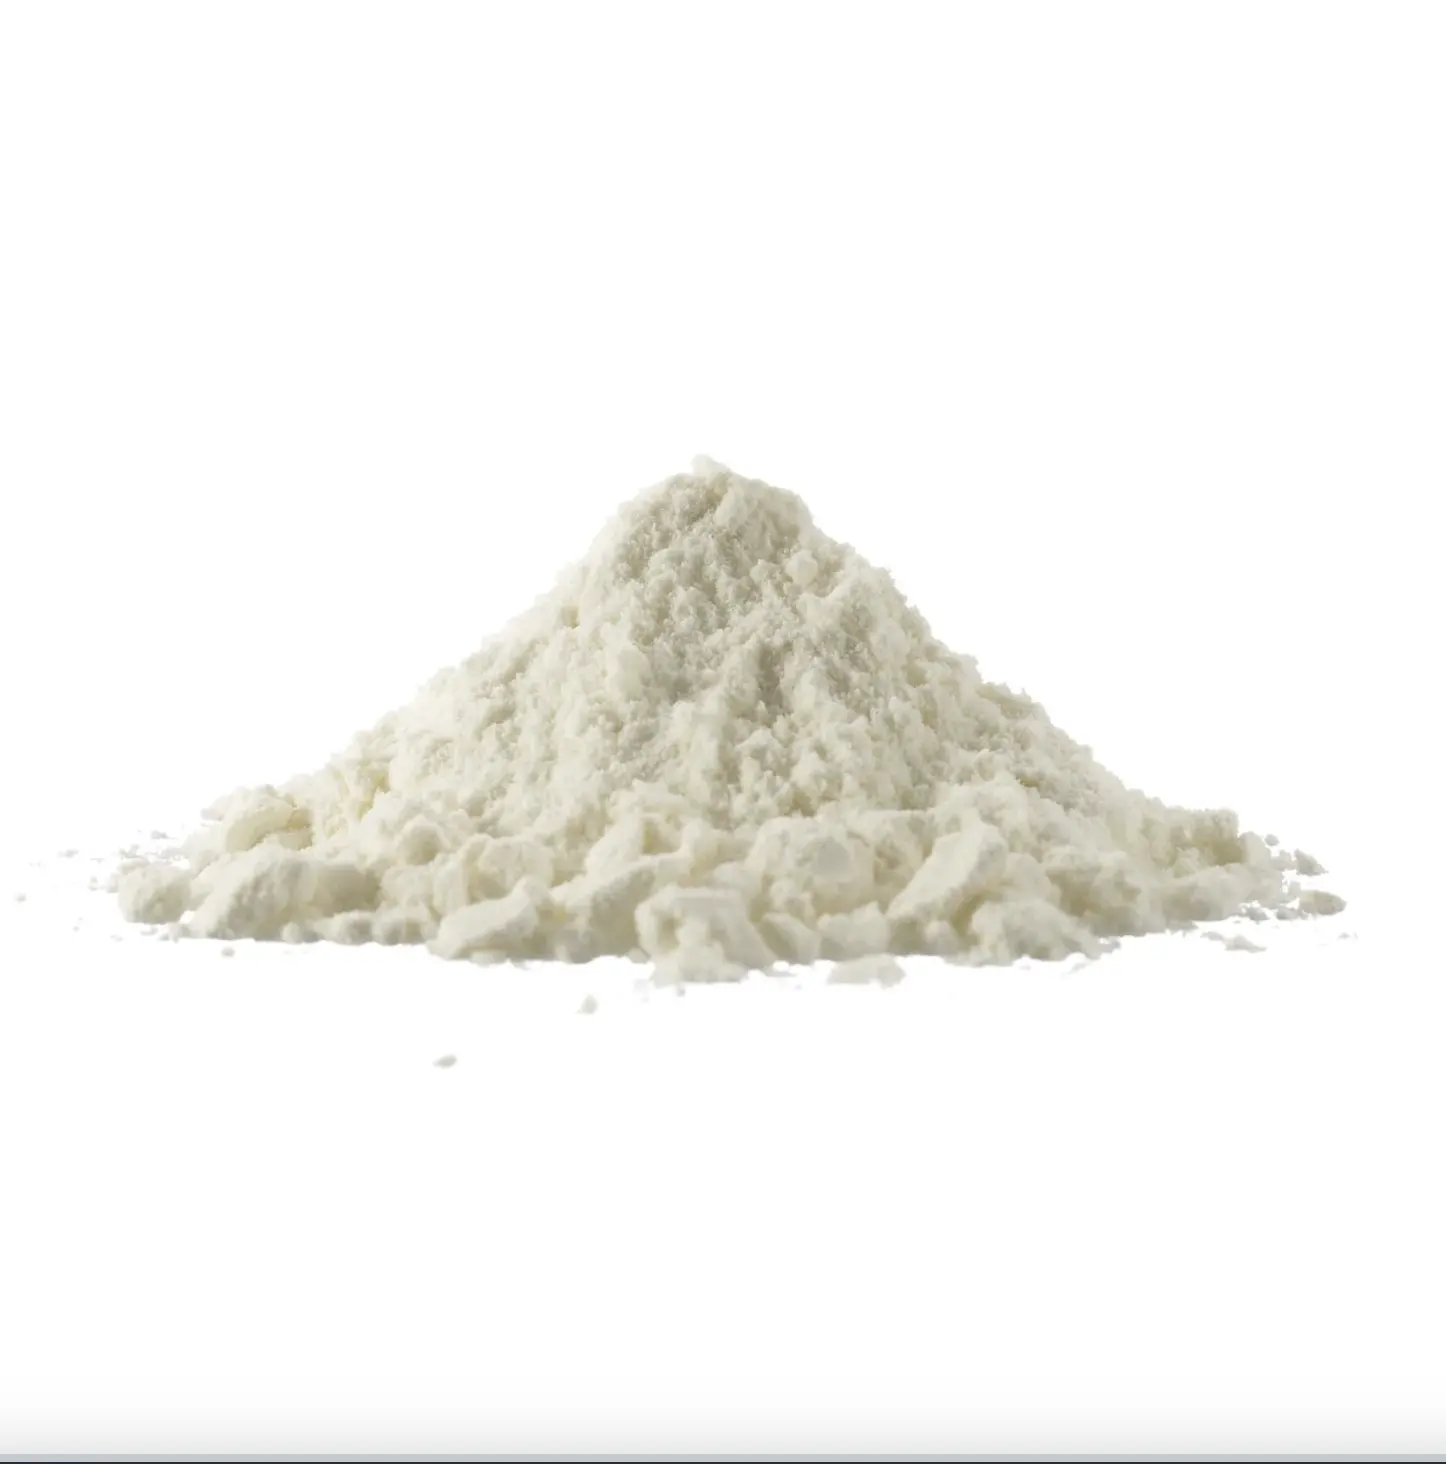 Skimmed Milk best Price / Full Cream Milk Powder / Sweet Whey Powder 25Kg and 50Kg Bags Available with Affordable prices